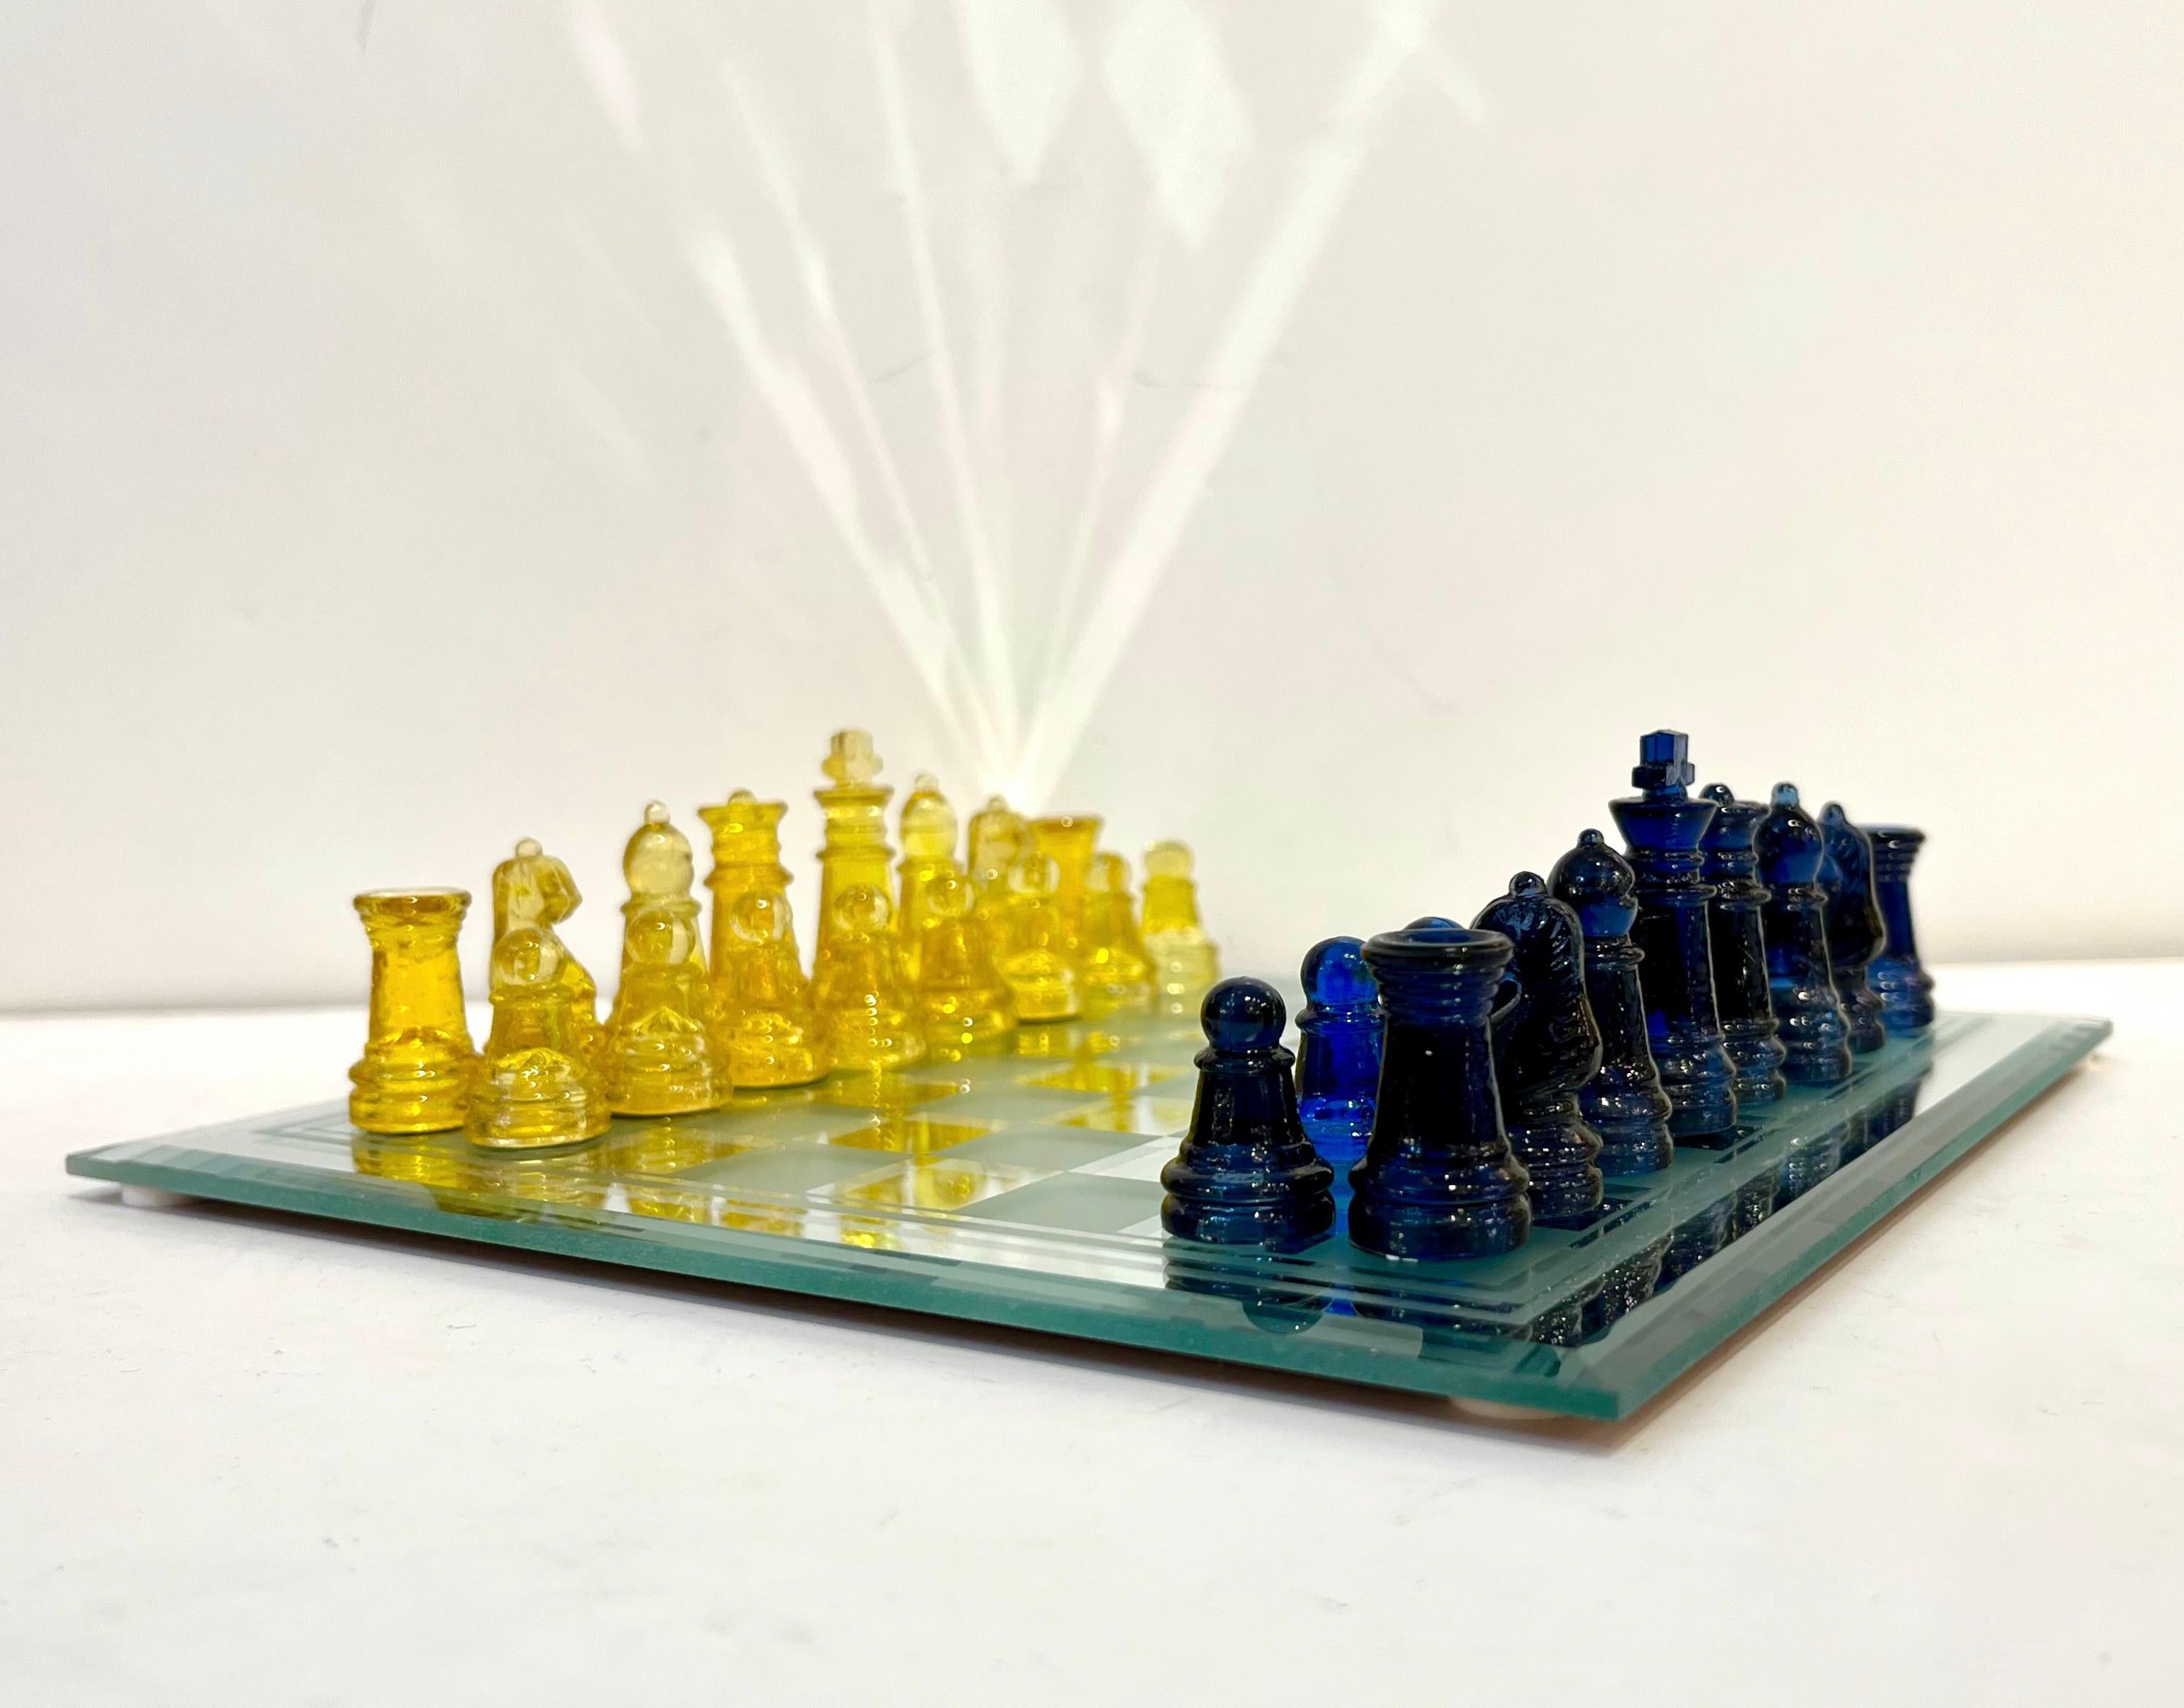 A fun Italian portable chess game of modern organic design, the detailed chess pieces are molded in night blue and yellow Murano Art glass, the mirror glass chessboard is decorated with frosted and mirrored squares, edged with a quality beveled